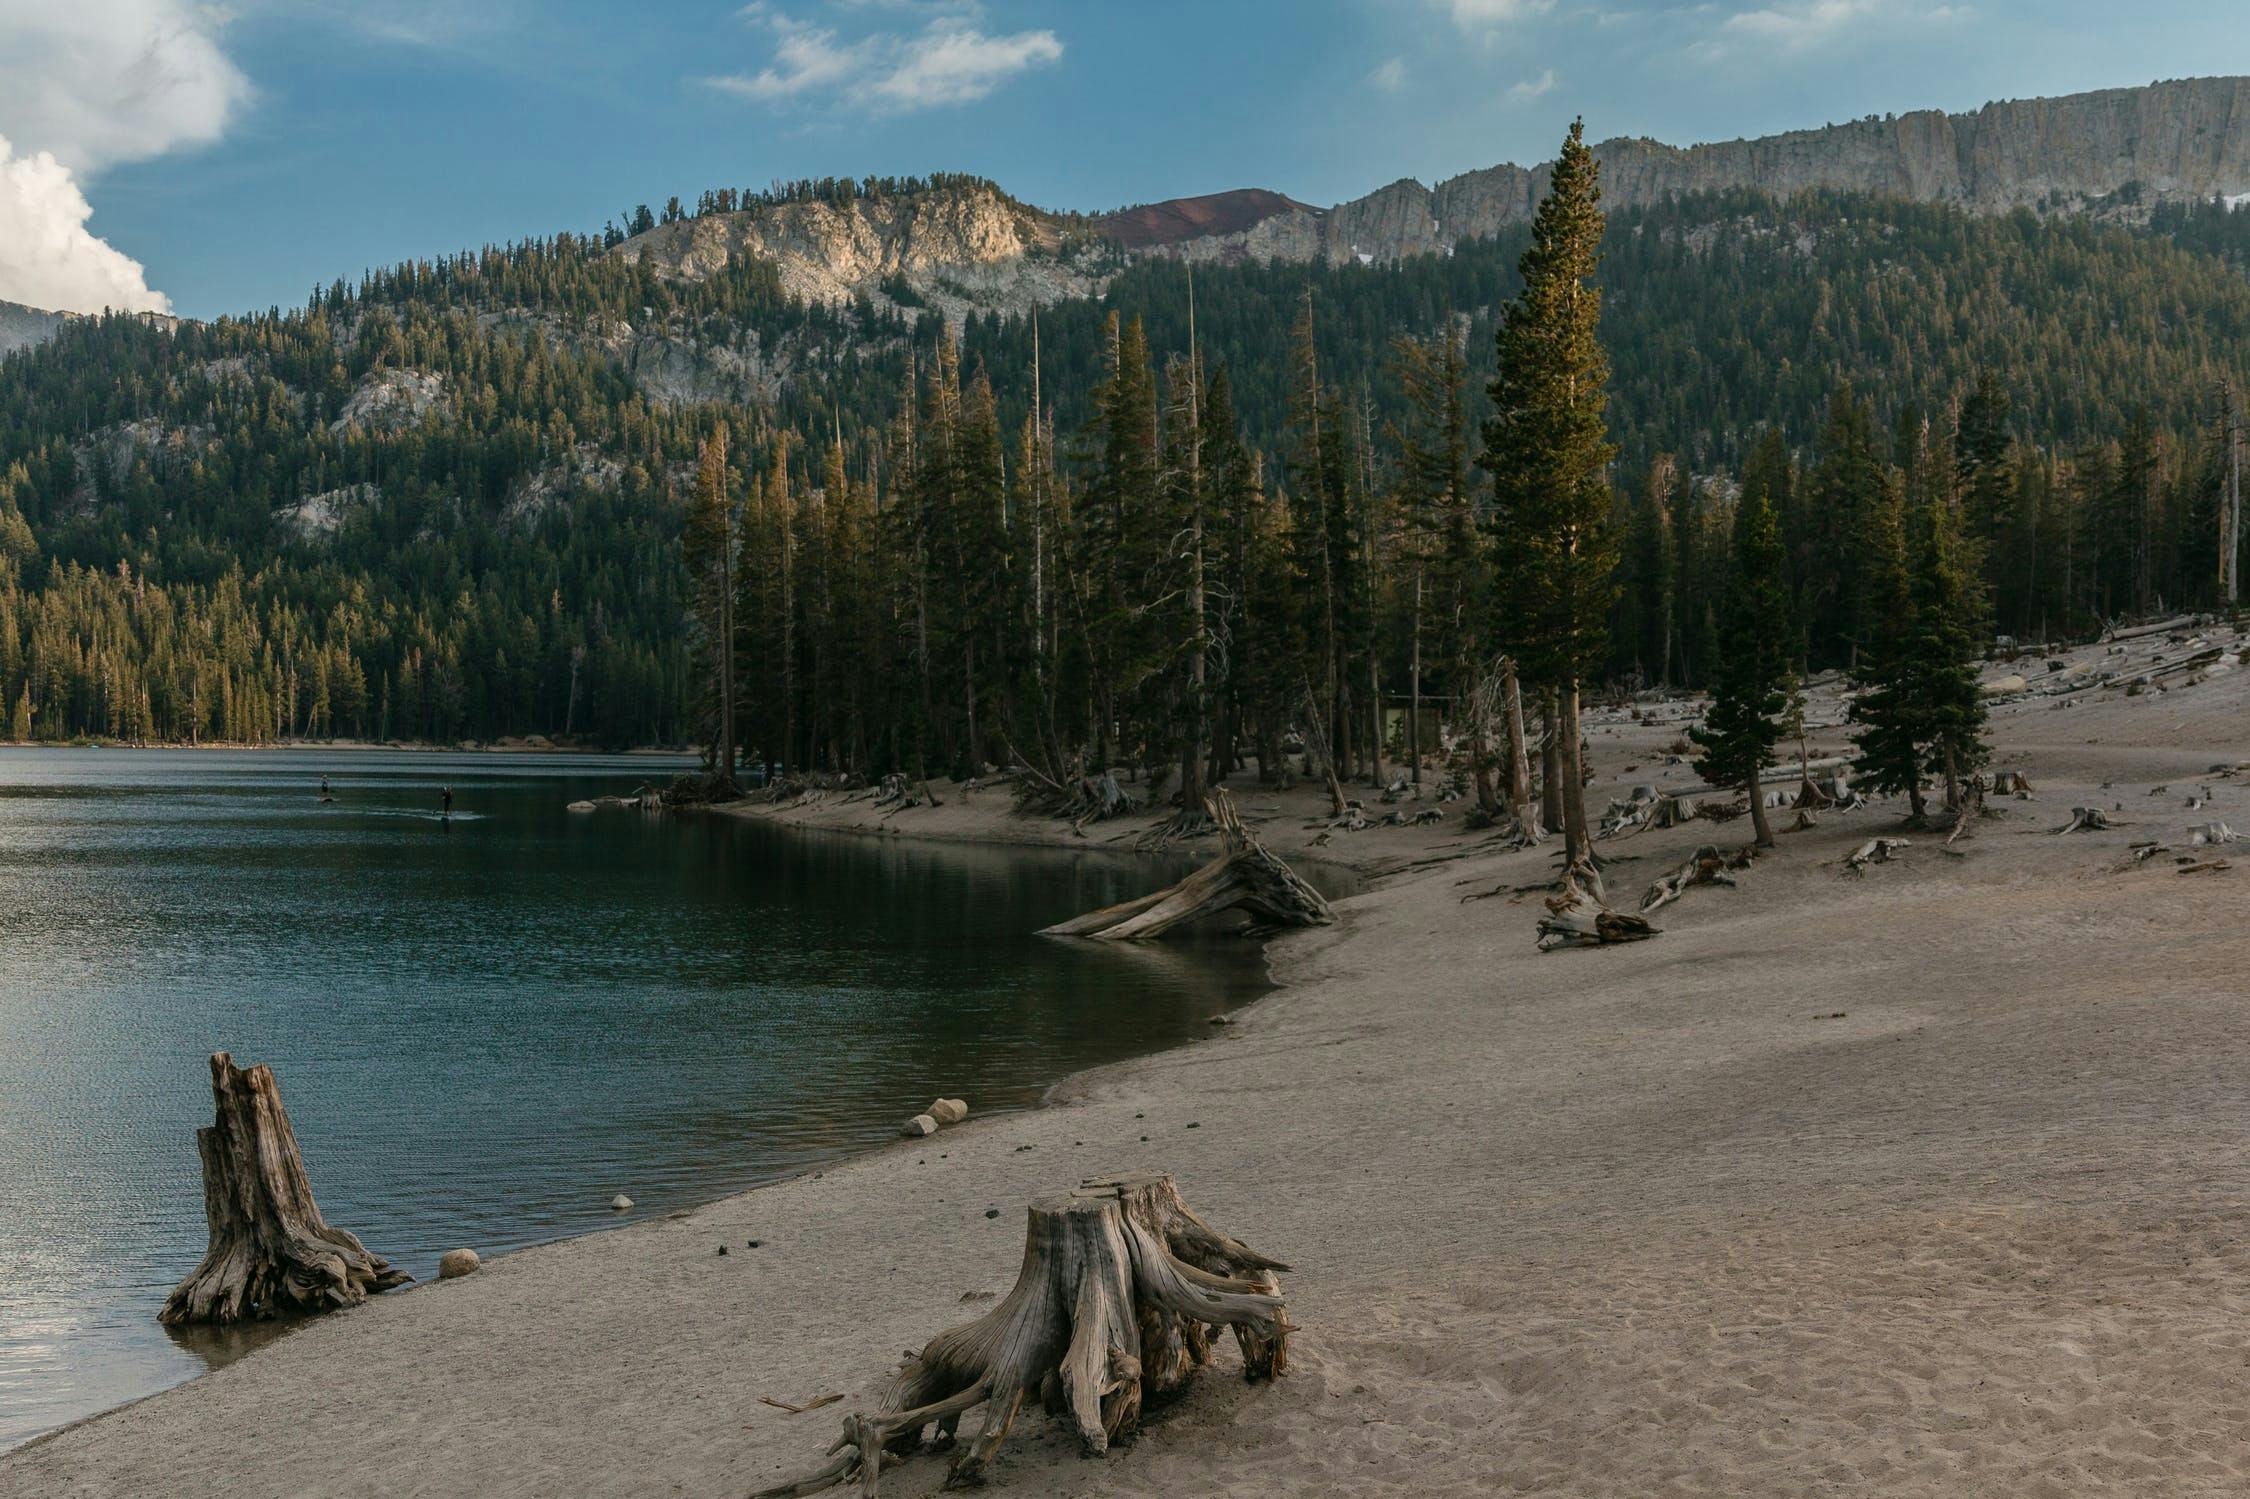 Mammoth Lake, with a beach and tree stumps in the foreground and trees and hills in the background